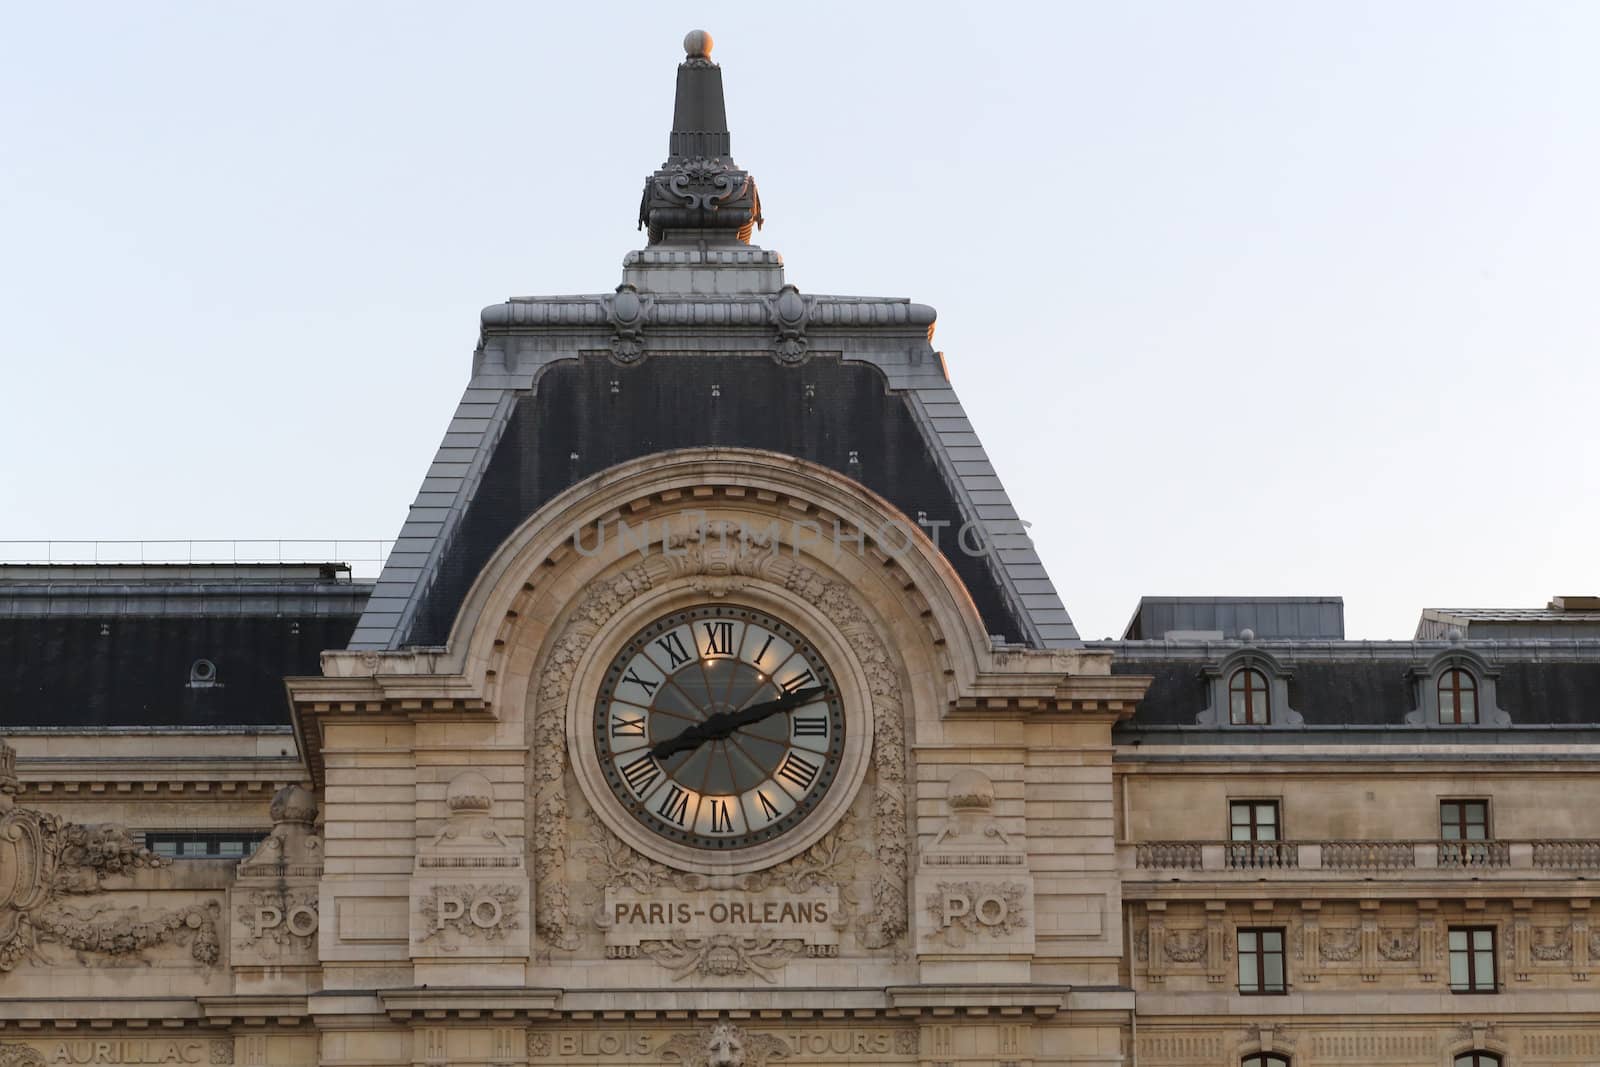 The Orsay Museum in Paris across the Seine River